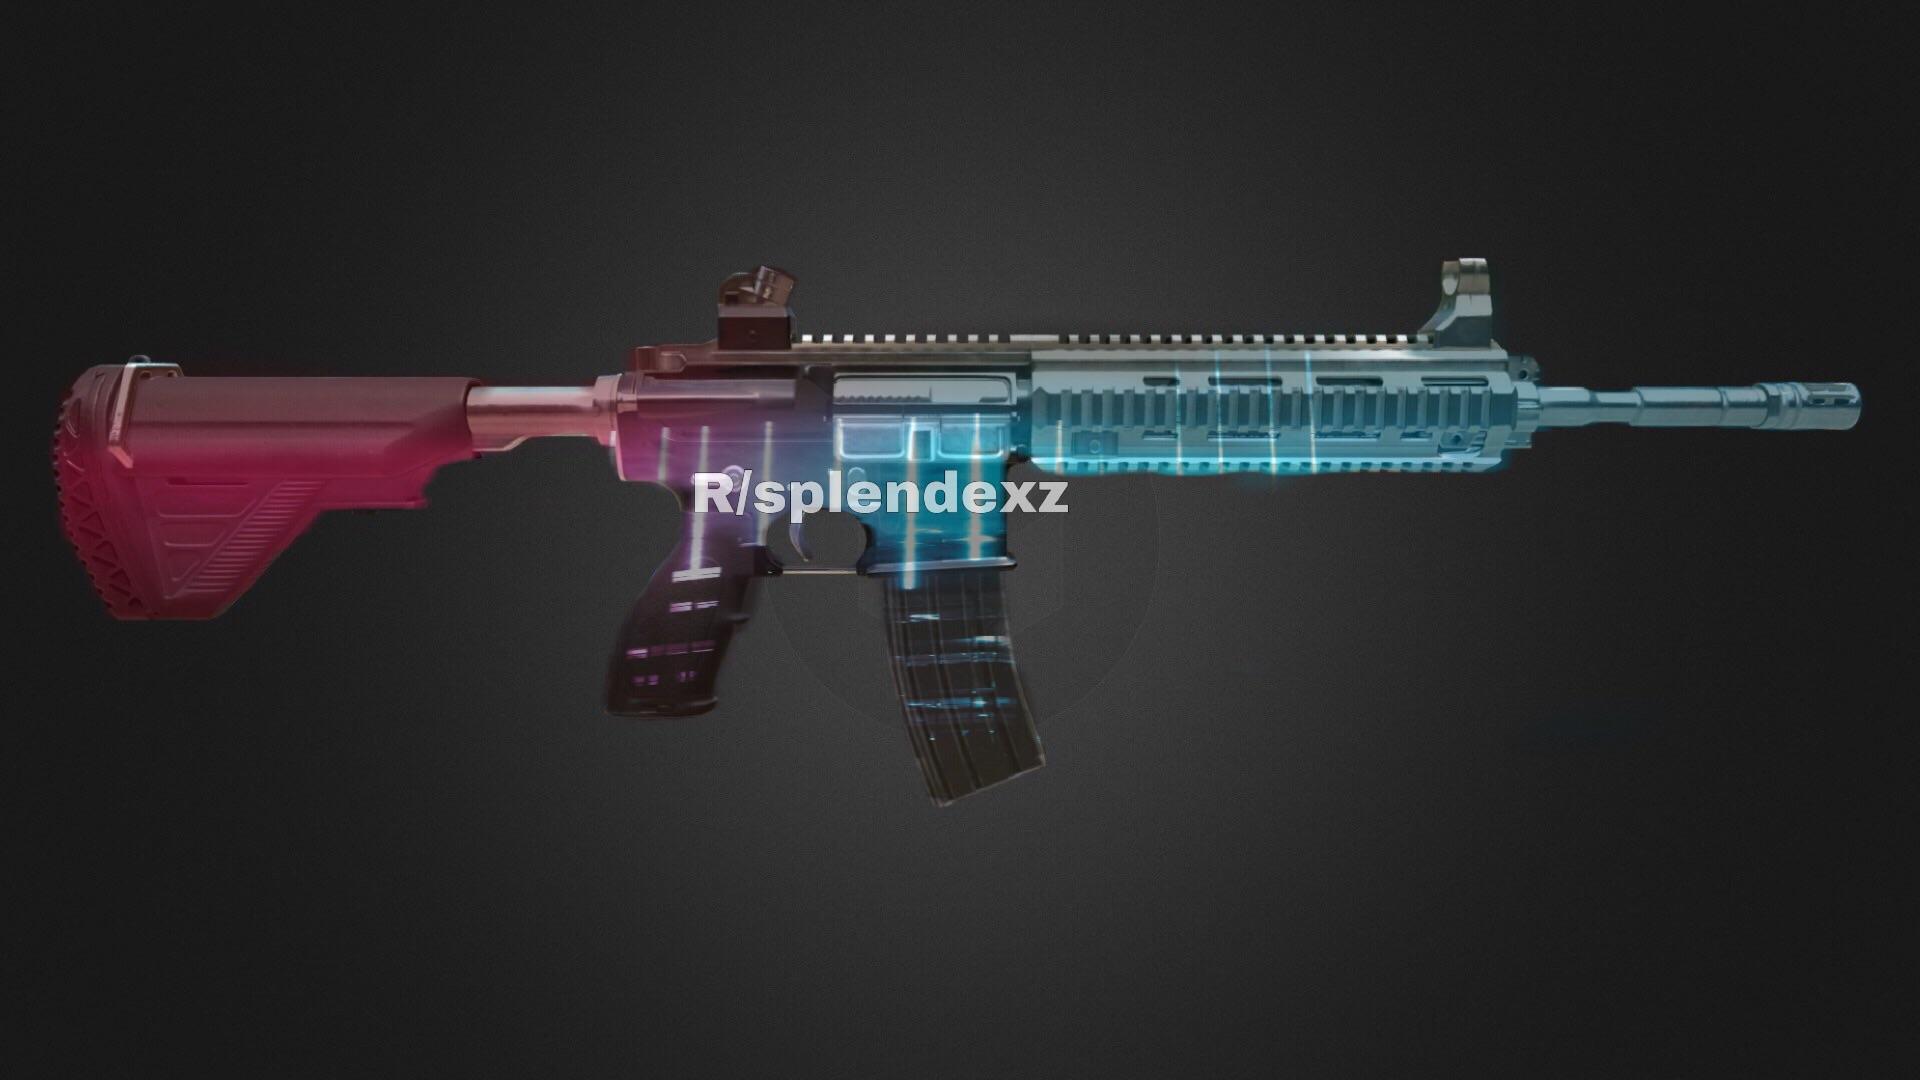 I Made an m416 design tell me if you like it!“